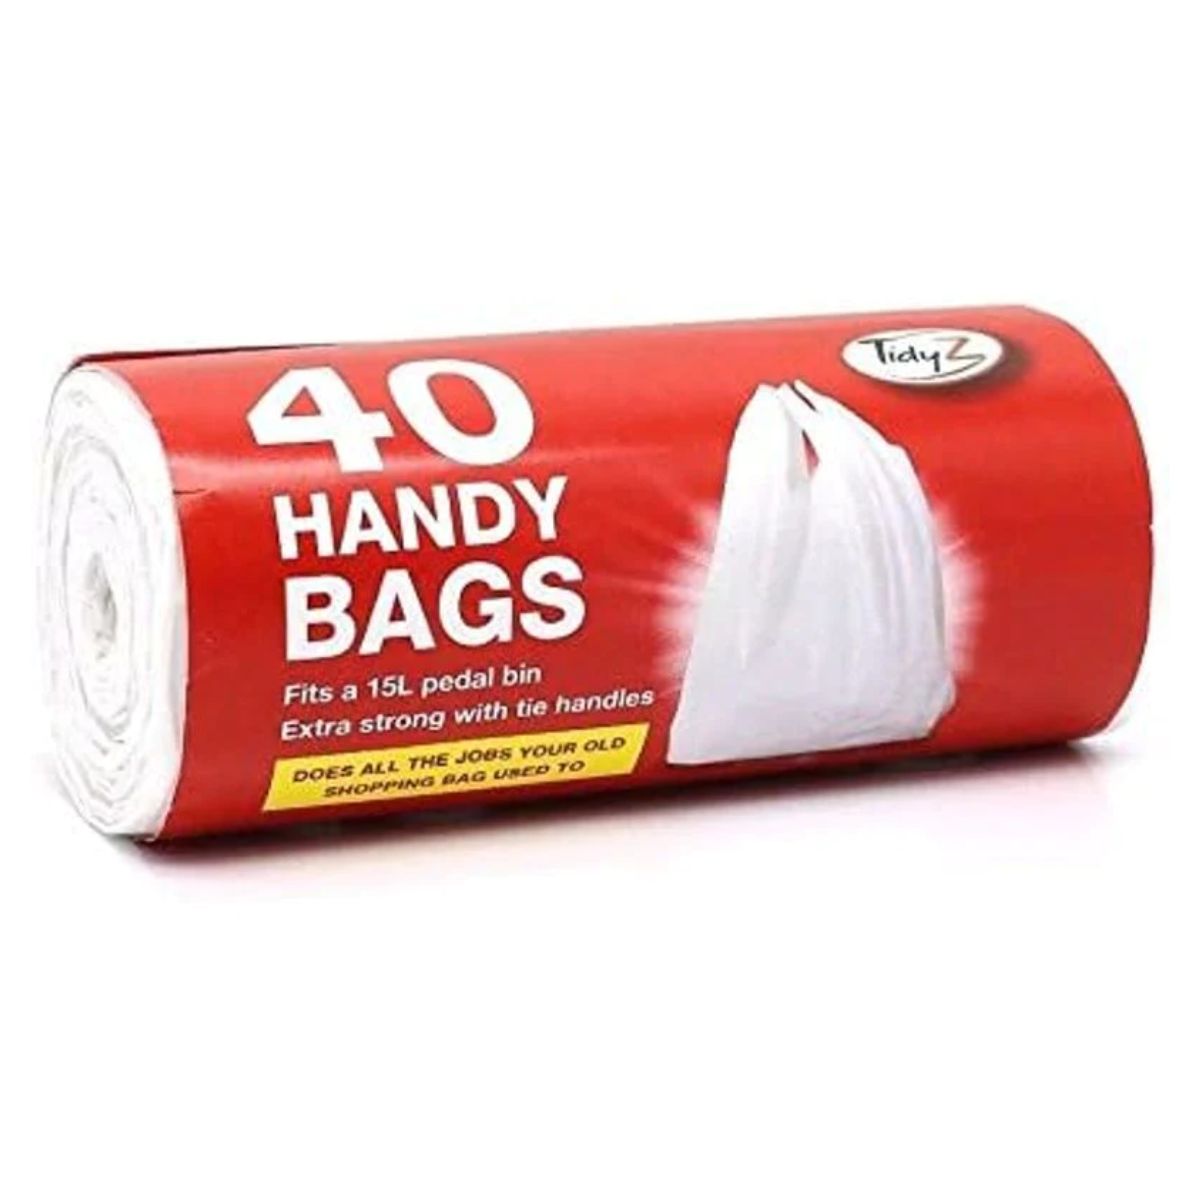 Tidyz - Handy Bags - 40 Pack on a white background.